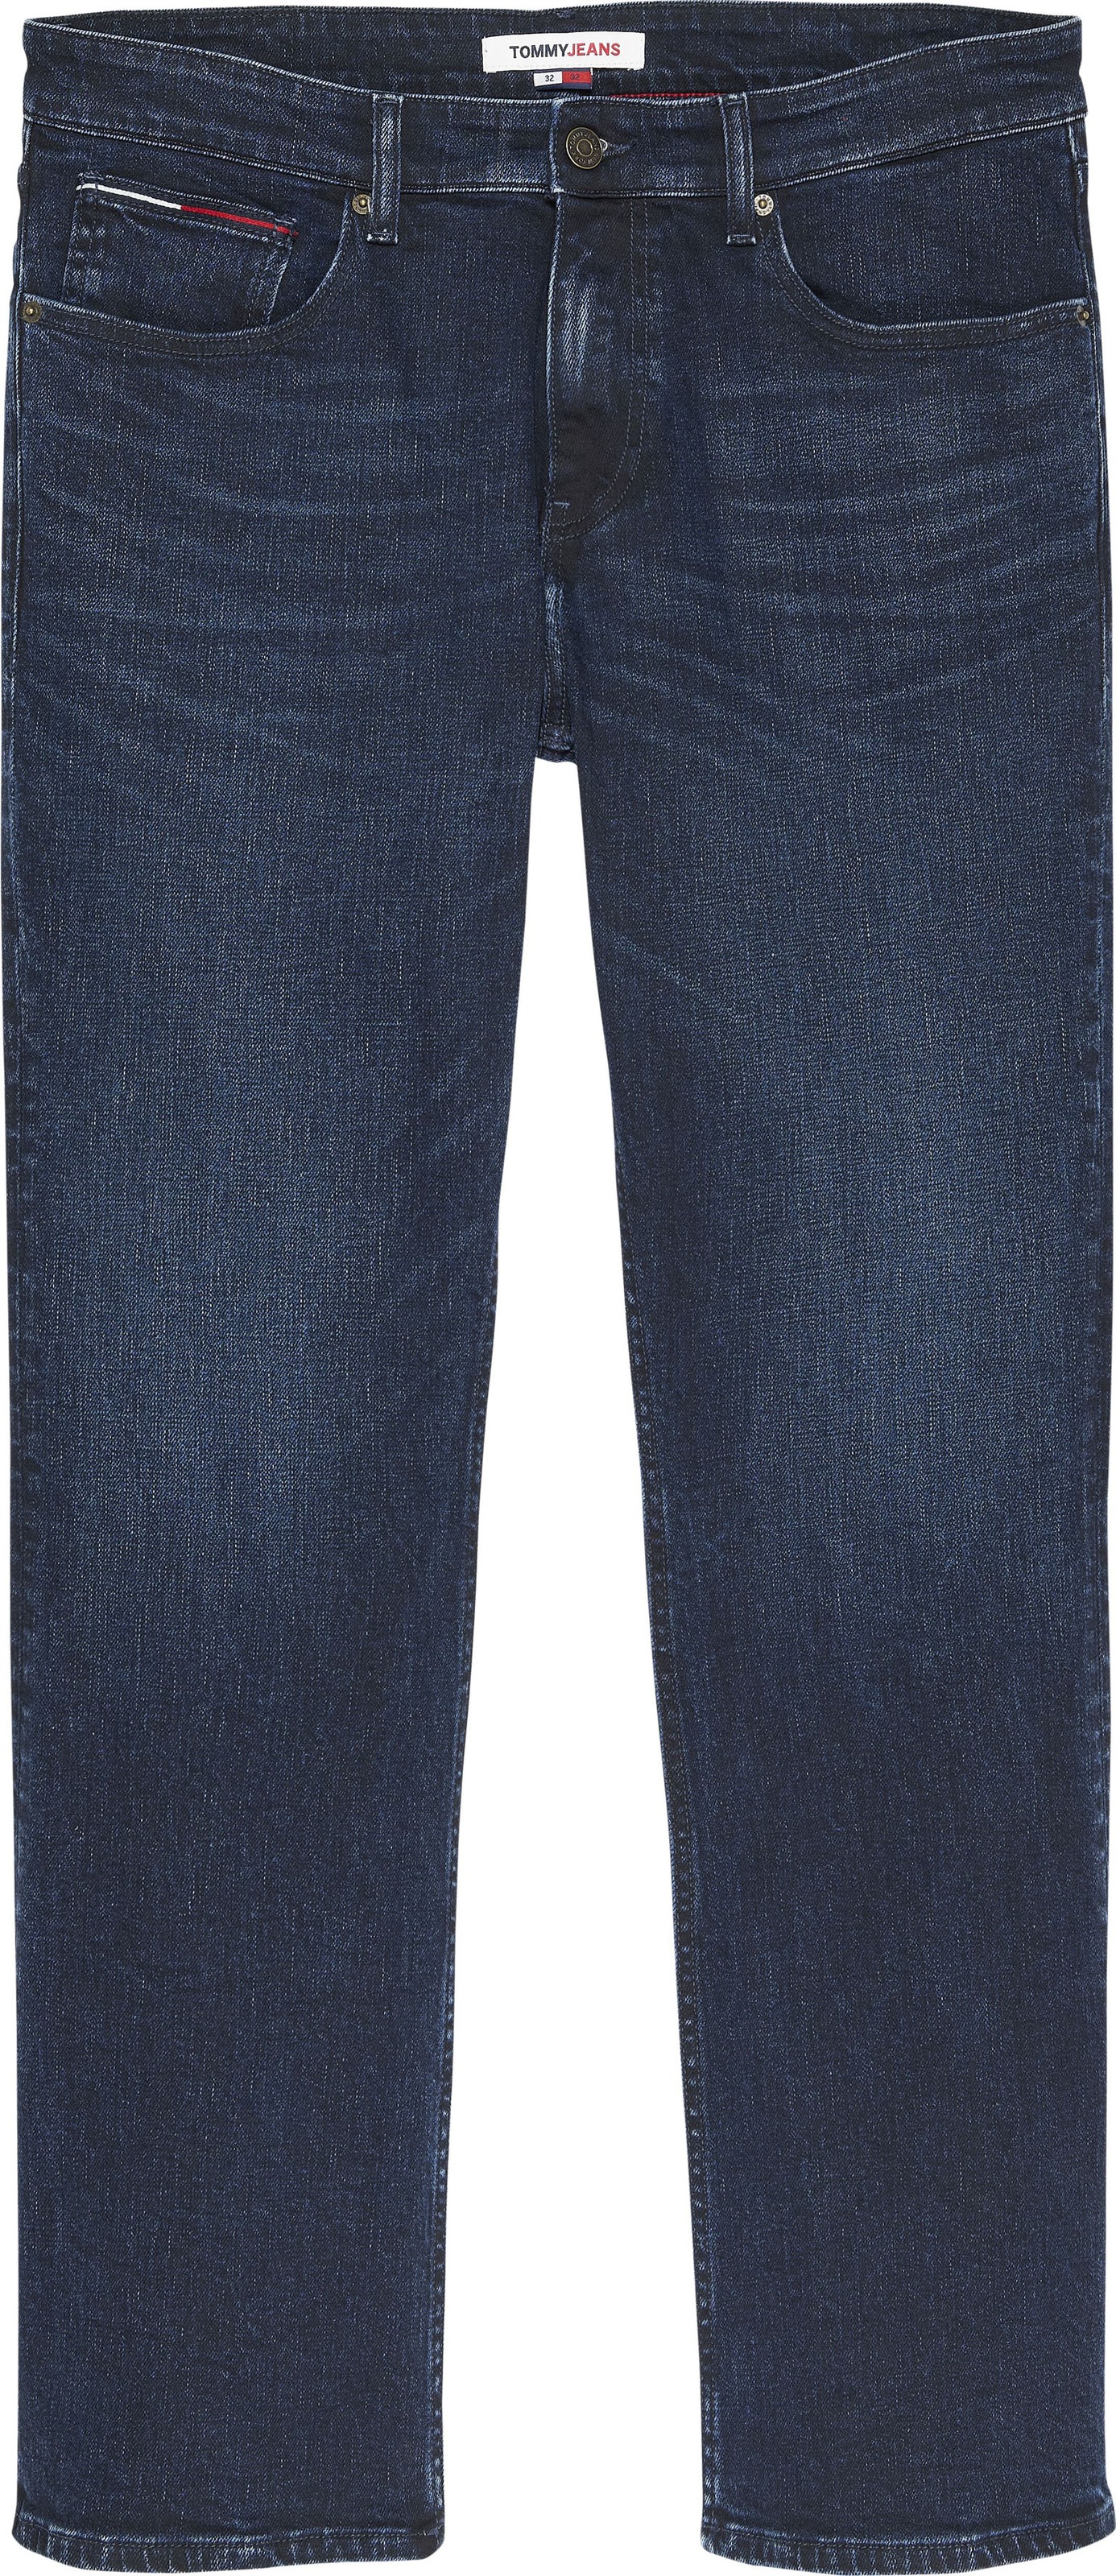 Straight-Jeans »RYAN BE« OTTO kaufen bei BOOTCUT Jeans RGLR online Tommy